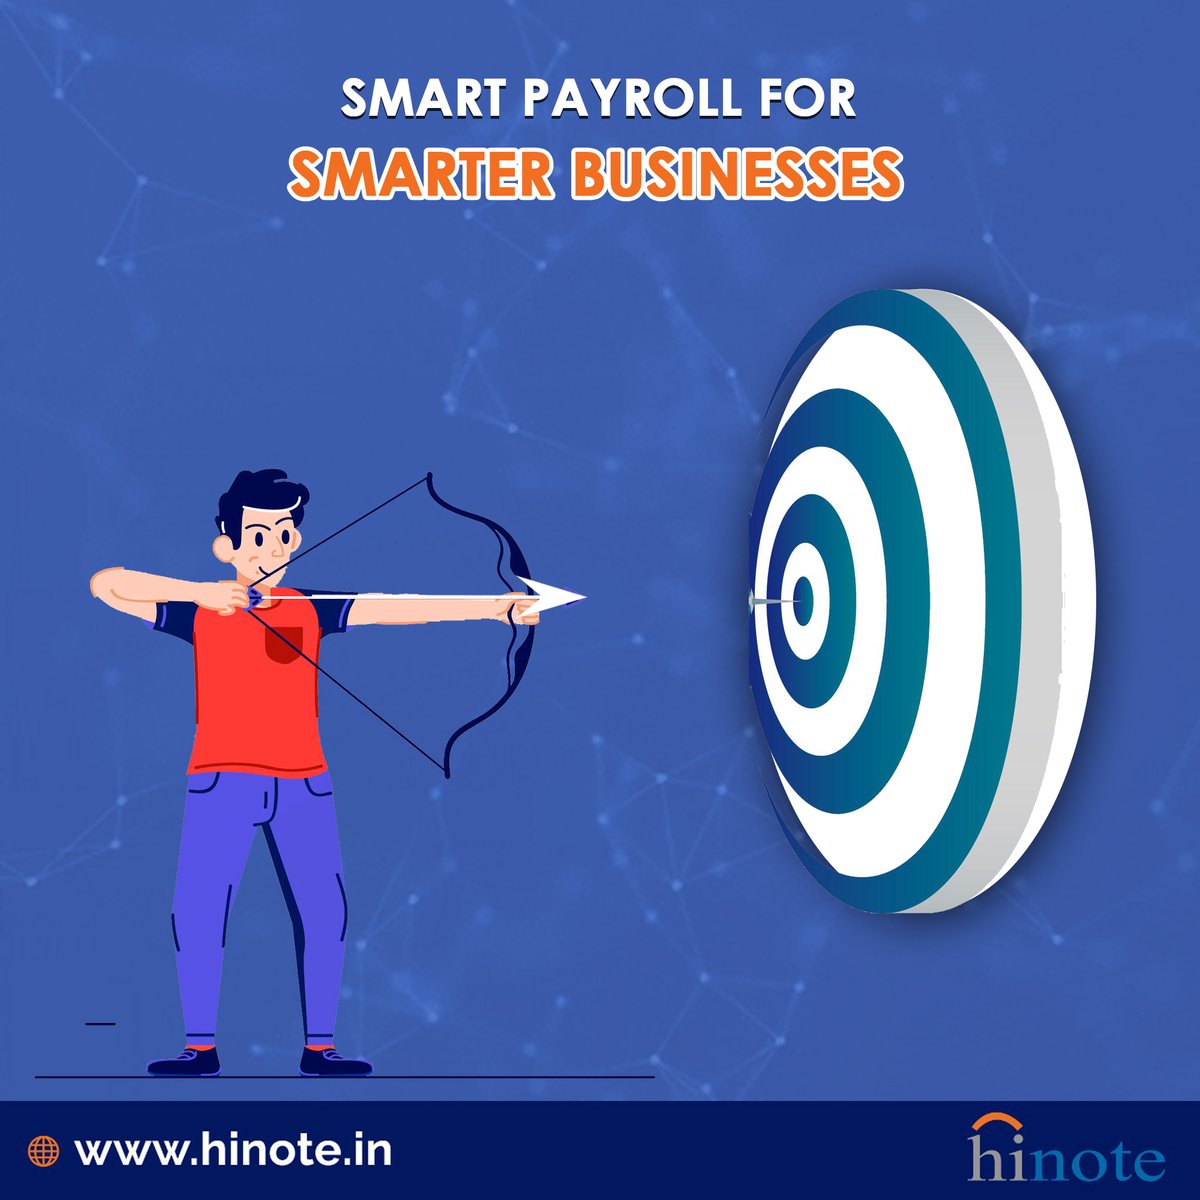 Get The Best Support from Cloud Based Payroll Solution.
Hinote offers one of the Best Payroll Software for your Business.

If that excites you, get more details : ☎️ +91 98400 55040 | 🌐 hinote.in

#Payroll #PayrollMistakes #PayrollErrors #PayrollService